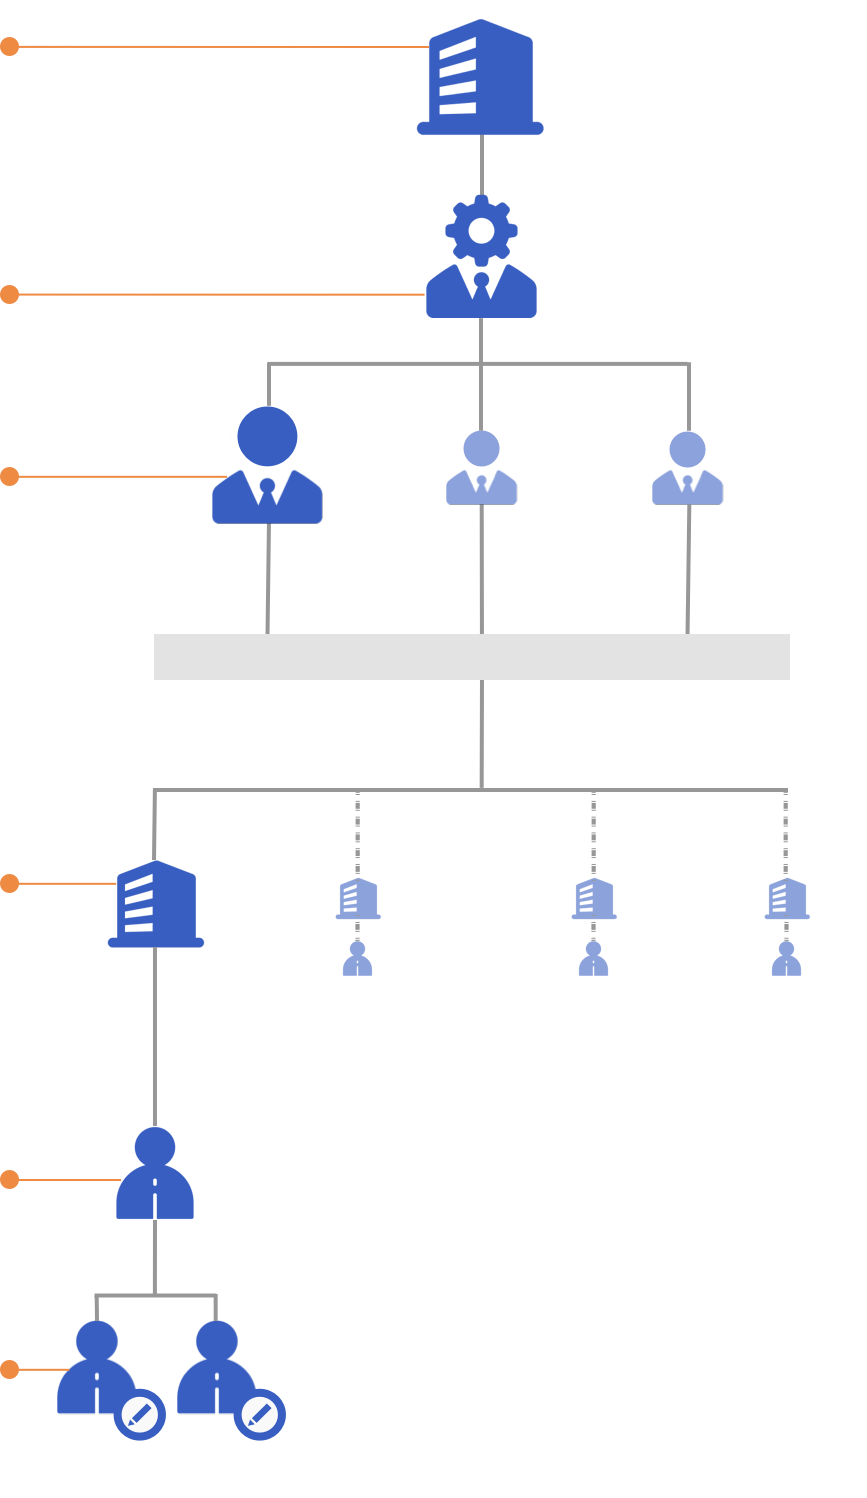 Diagram of the governance roles hierarchy